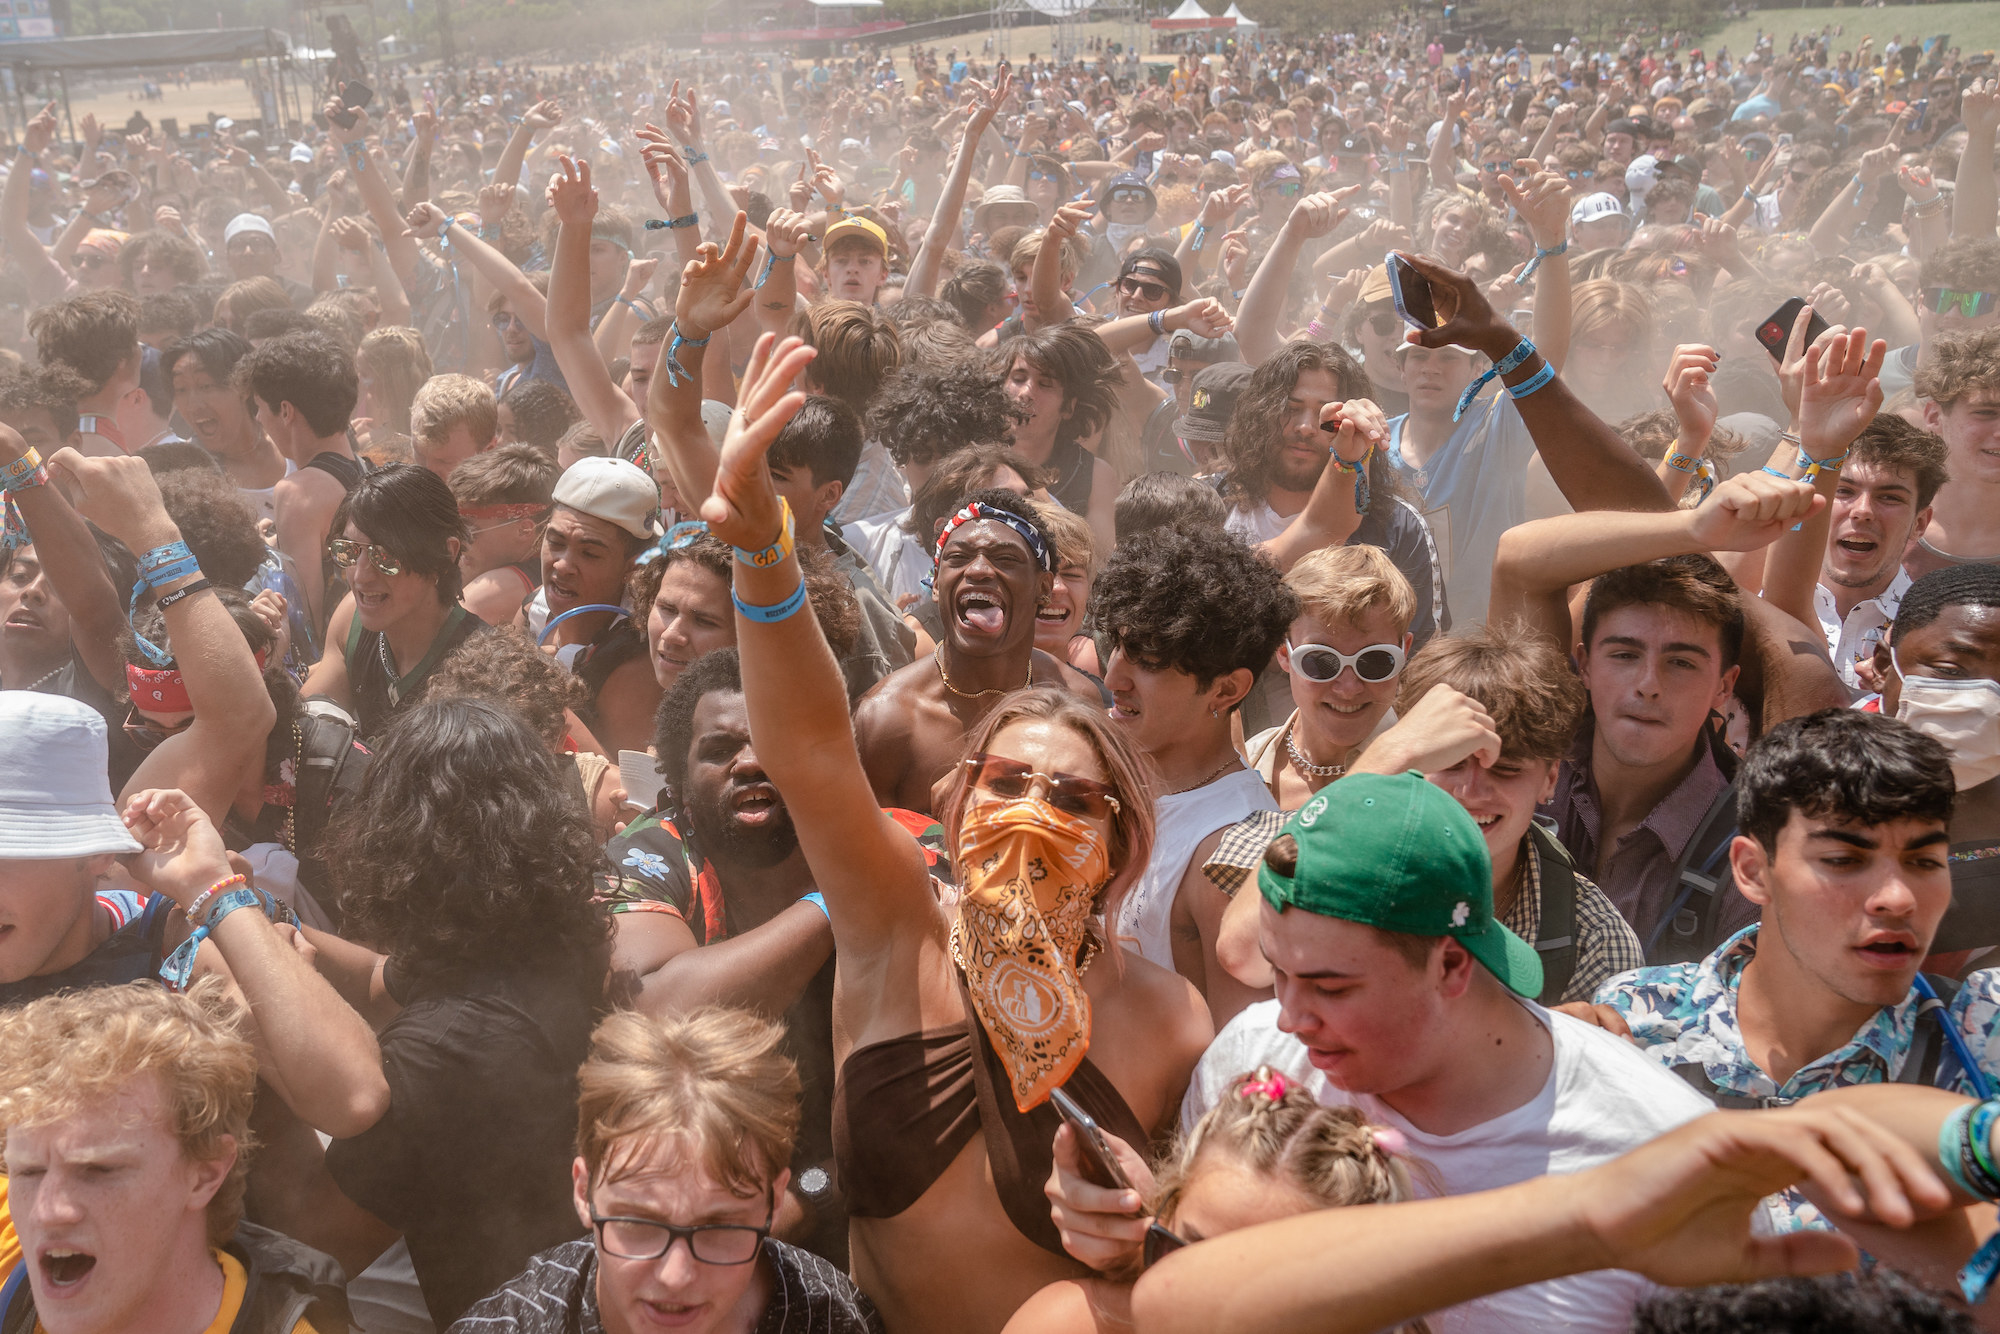 Dust fills the air as attendees lift their arms up at Lollapalooza music festival.